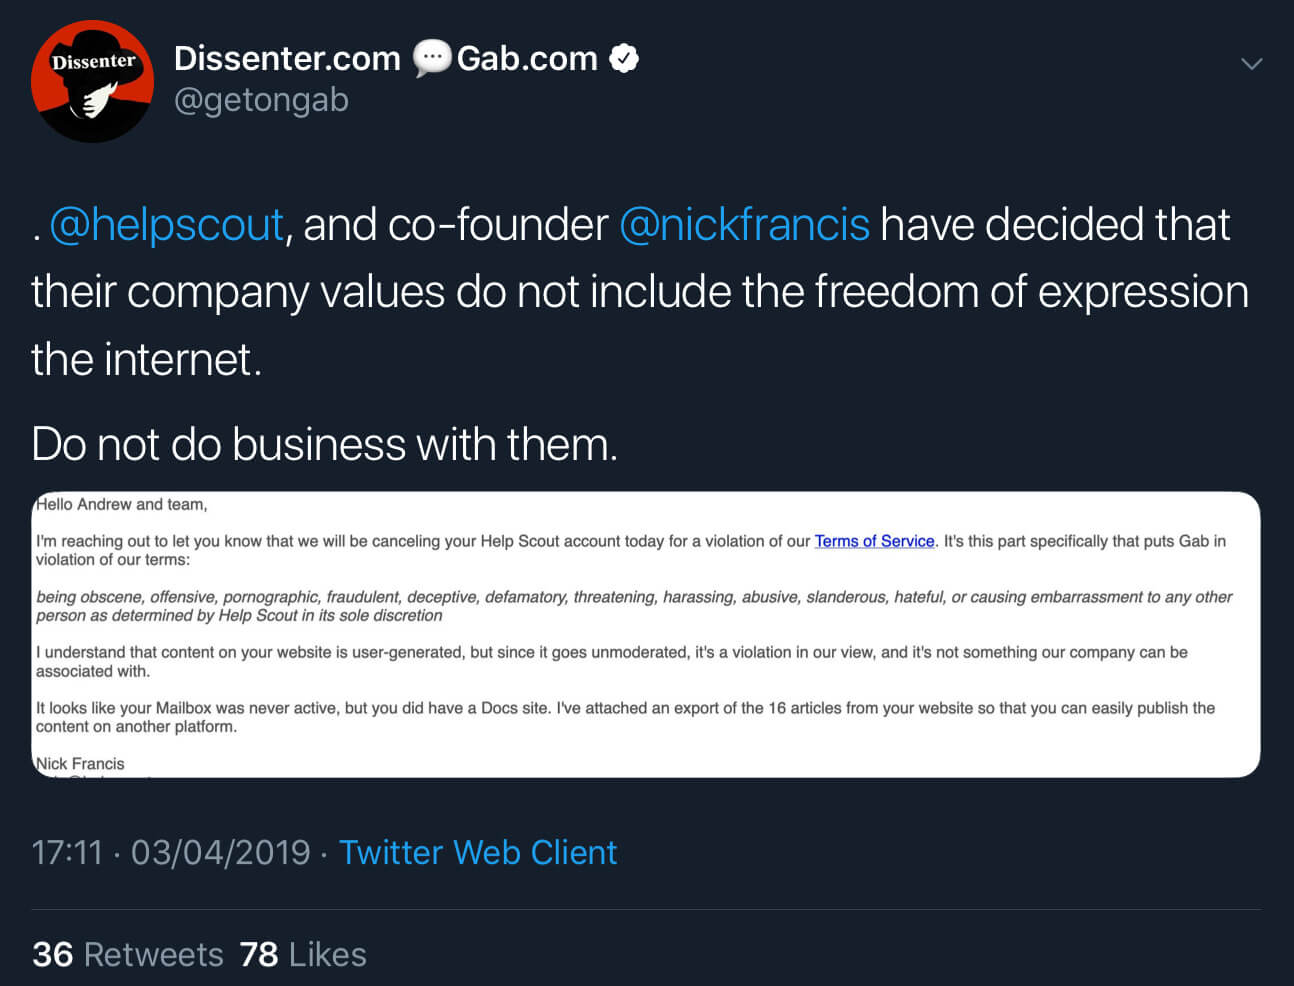 Gab announcing that their Help Scout account has been canceled.